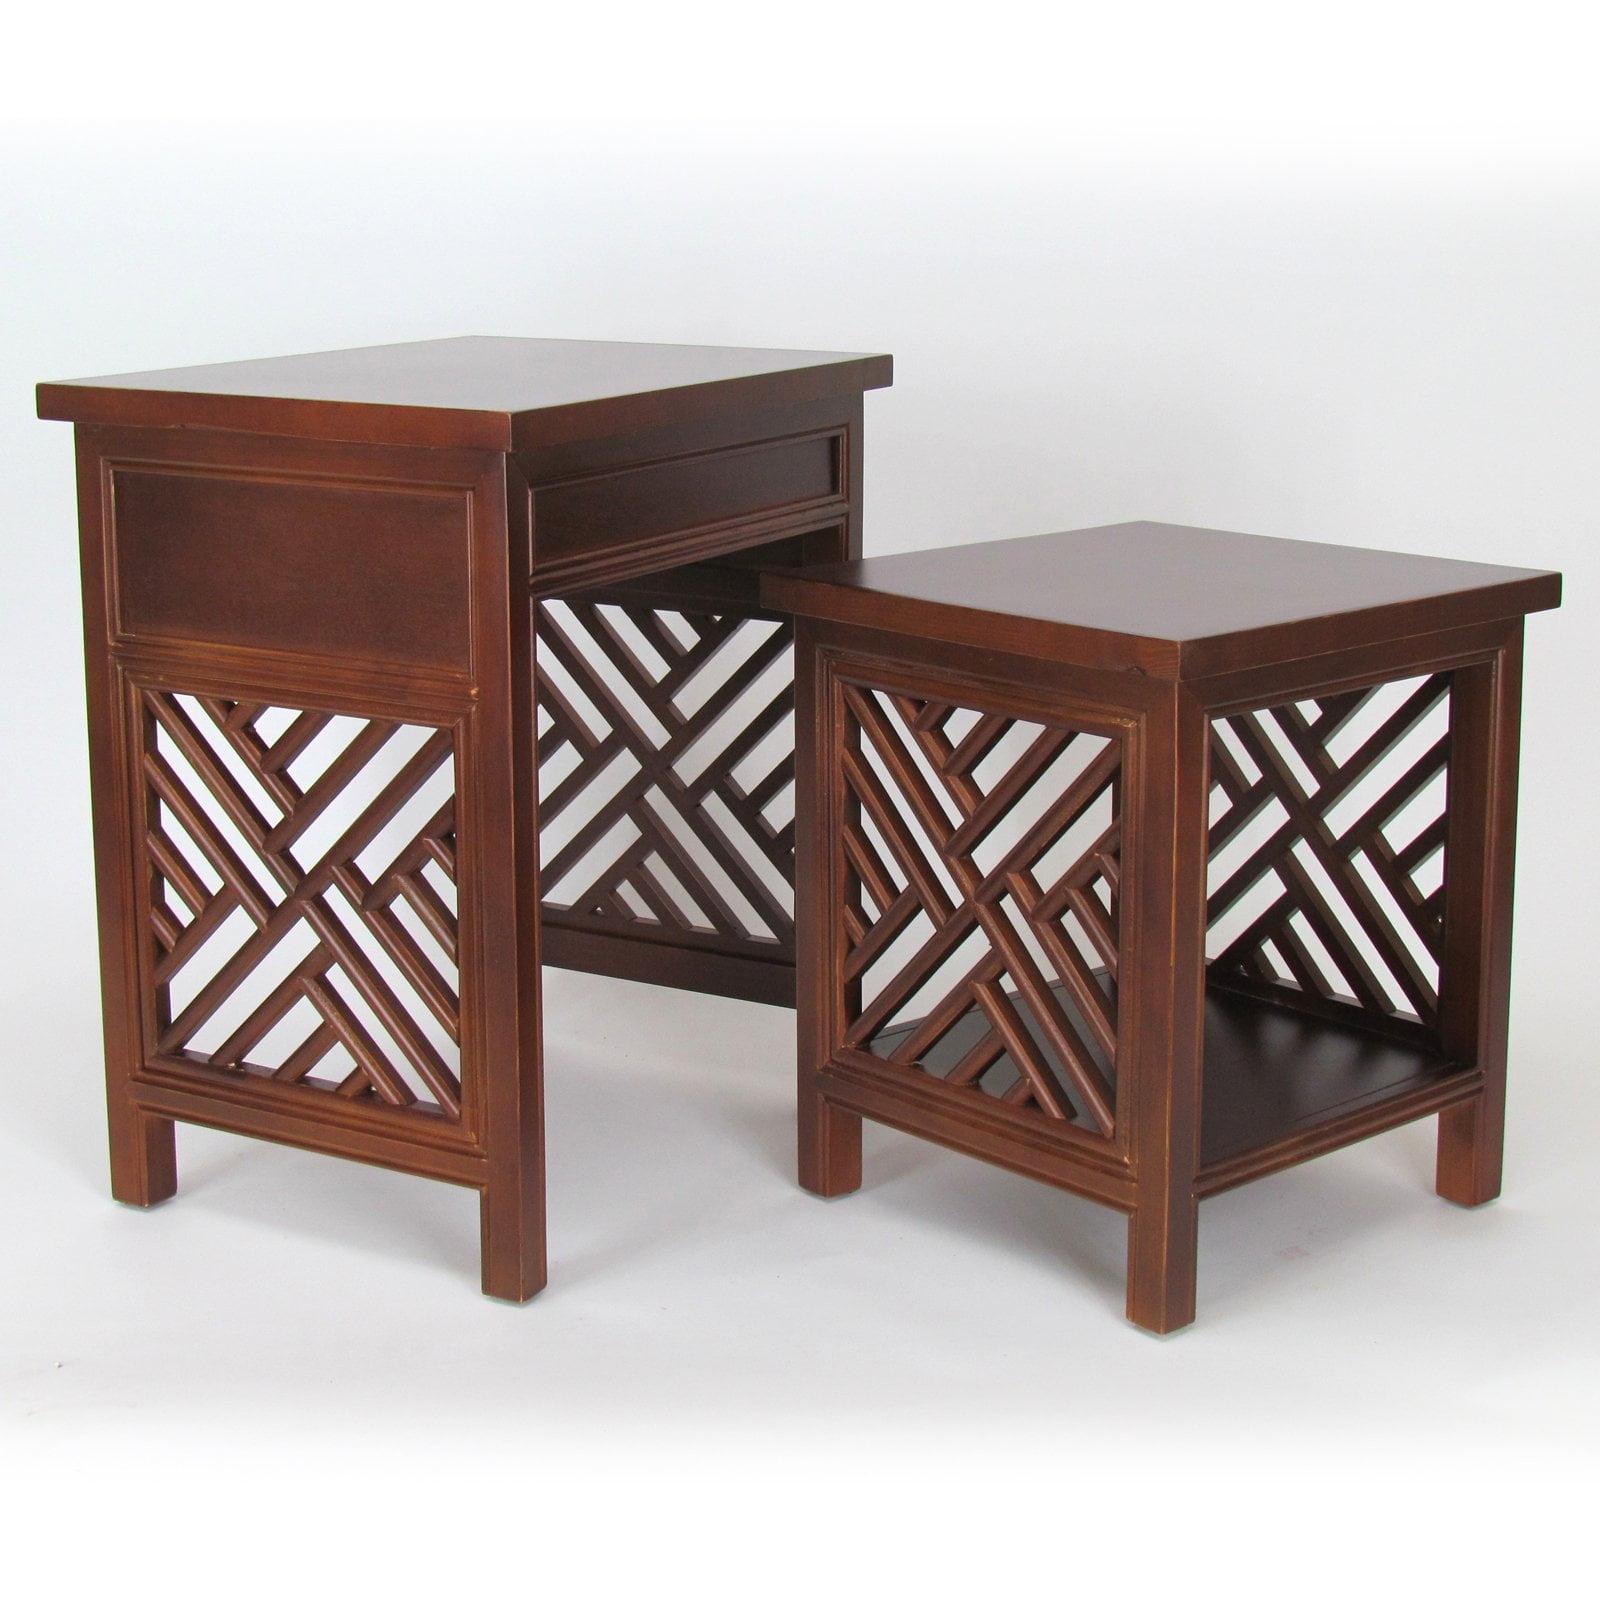 Latticework Basswood Nesting Side Tables in Brown